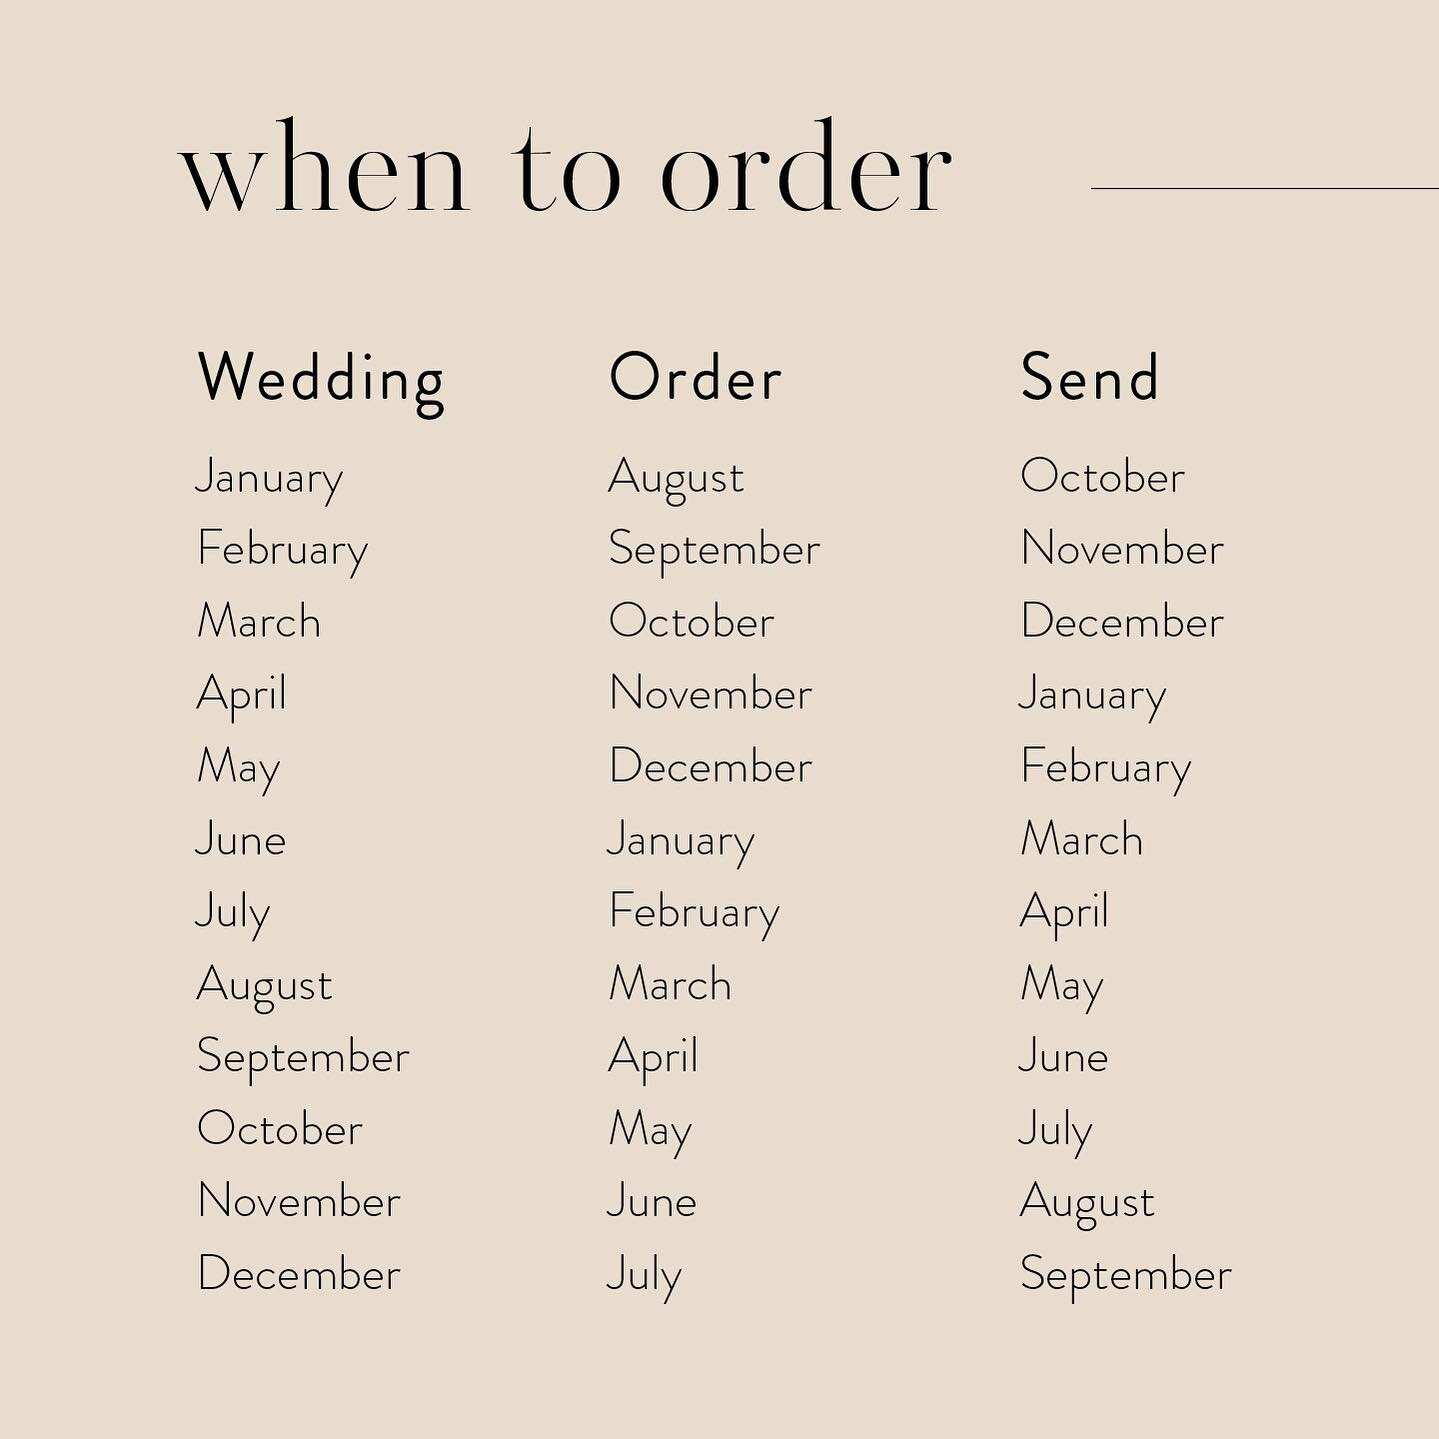 Attention engaged couples! 

Unsure about the perfect time to order and send your invitations? Here is our handy guide to help you plan your wedding. 

Save this post for future reference. 

We want you to enjoy the design process and be as stress fr